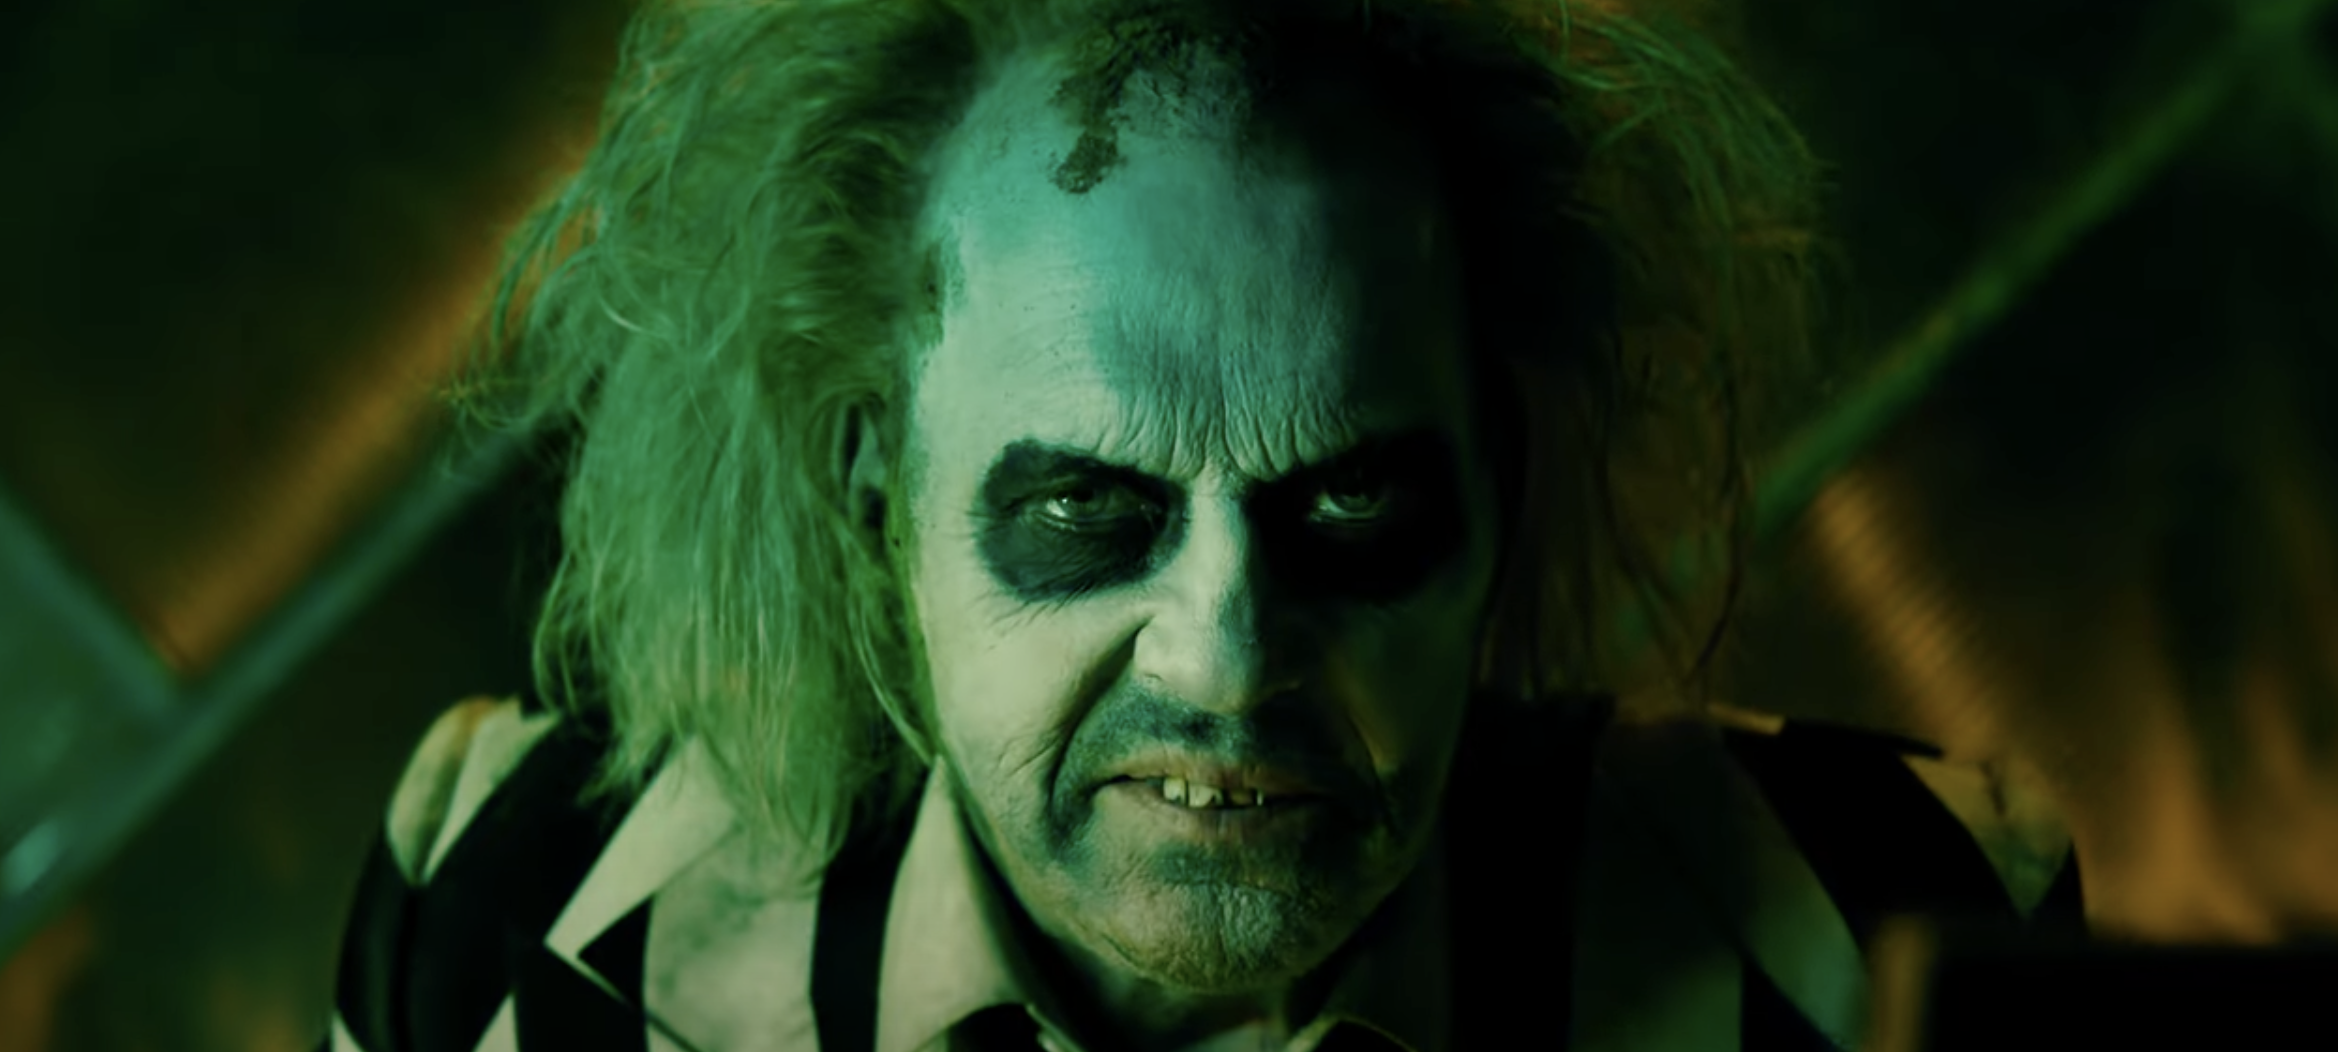 The First Teaser Trailer For ‘Beetlejuice 2’ Is Here and It Looks So Good